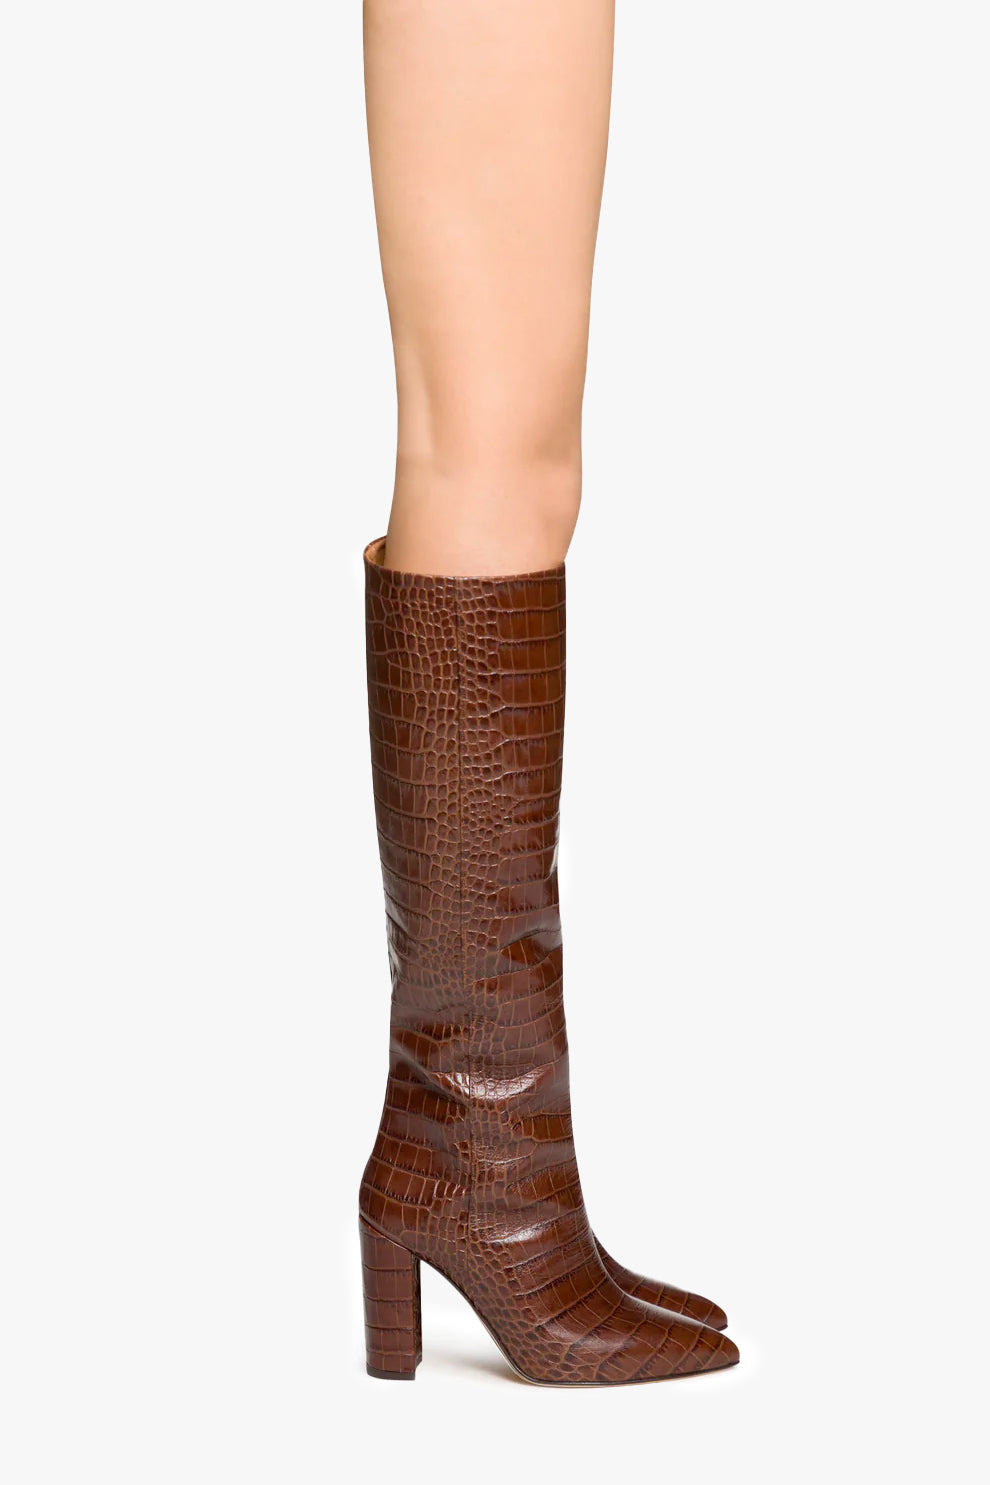 Chocolate brown croc-effect leather boots - Paris Texas